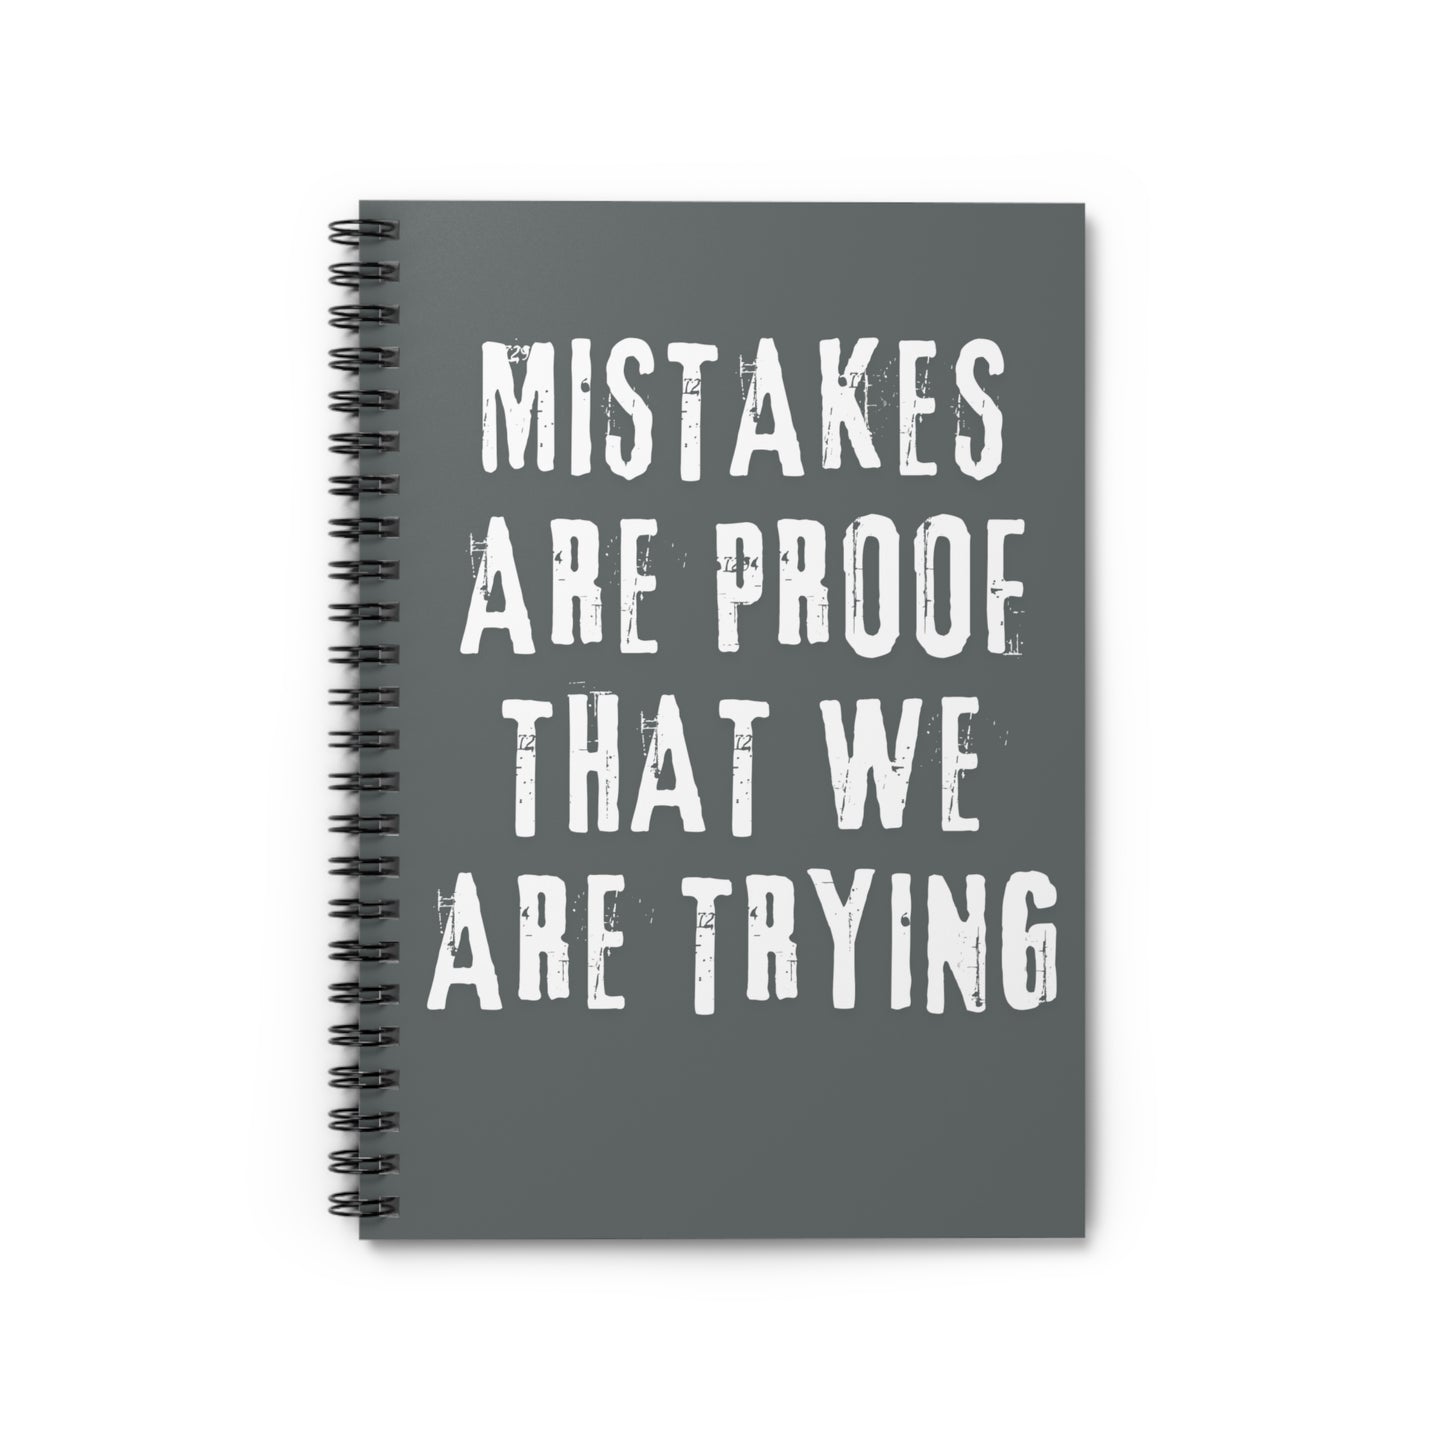 Mistakes are proof Spiral Notebook - Ruled Line